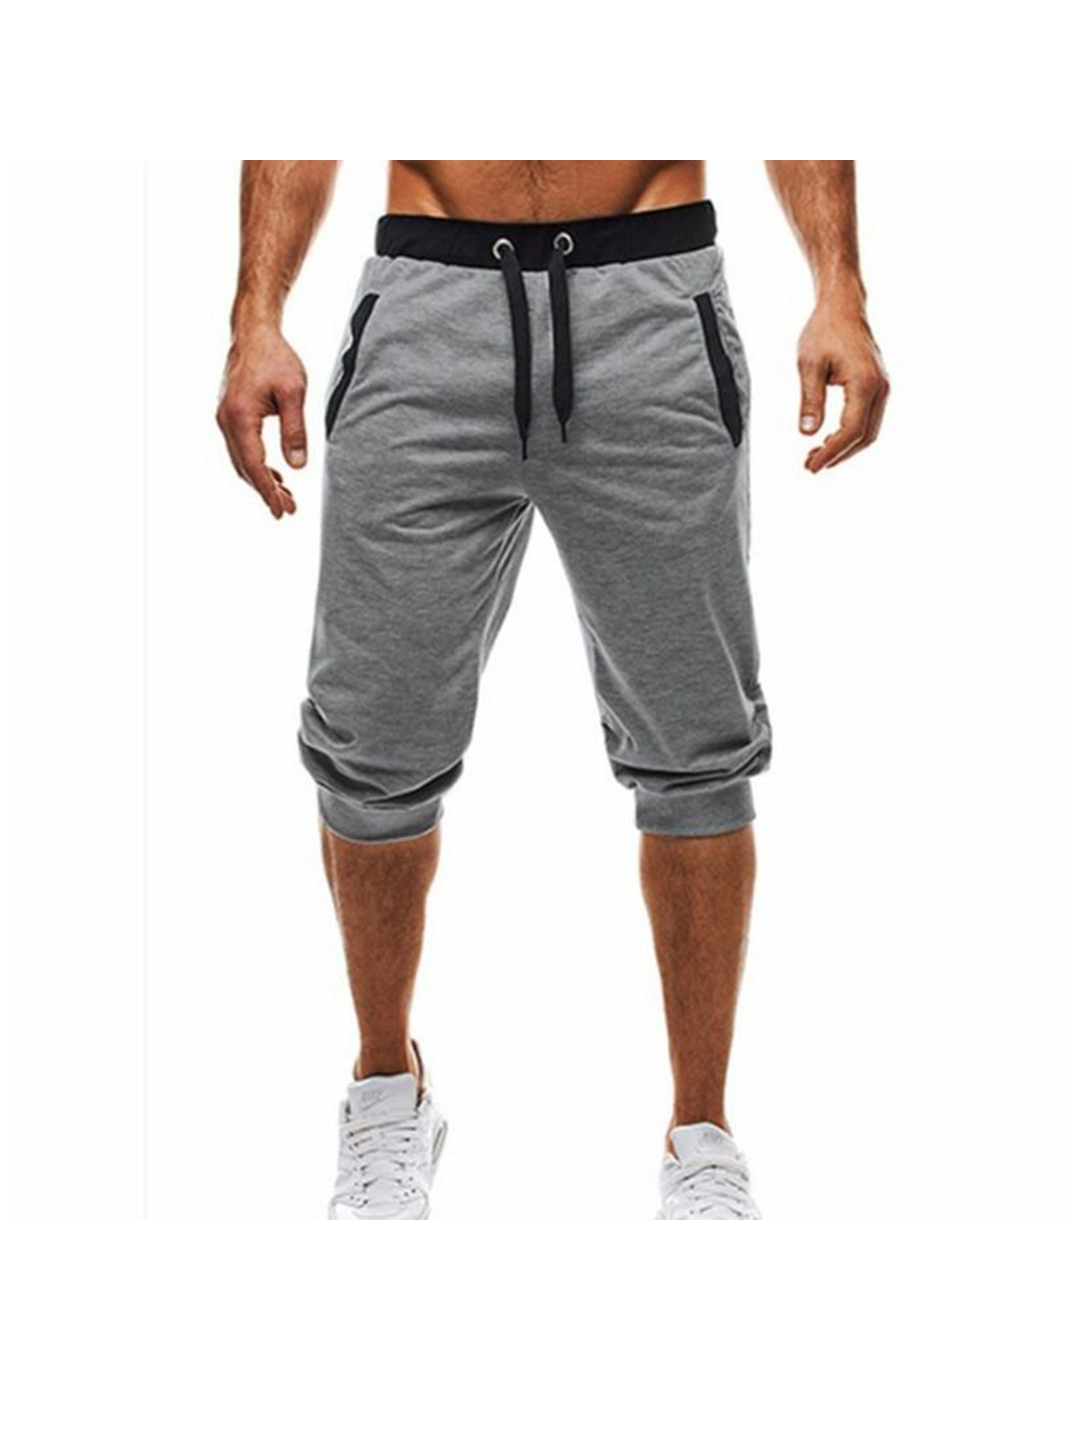 Ryan Slim Fit Contrast Color Waist Cropped Shorts-poisonstreetwear.com